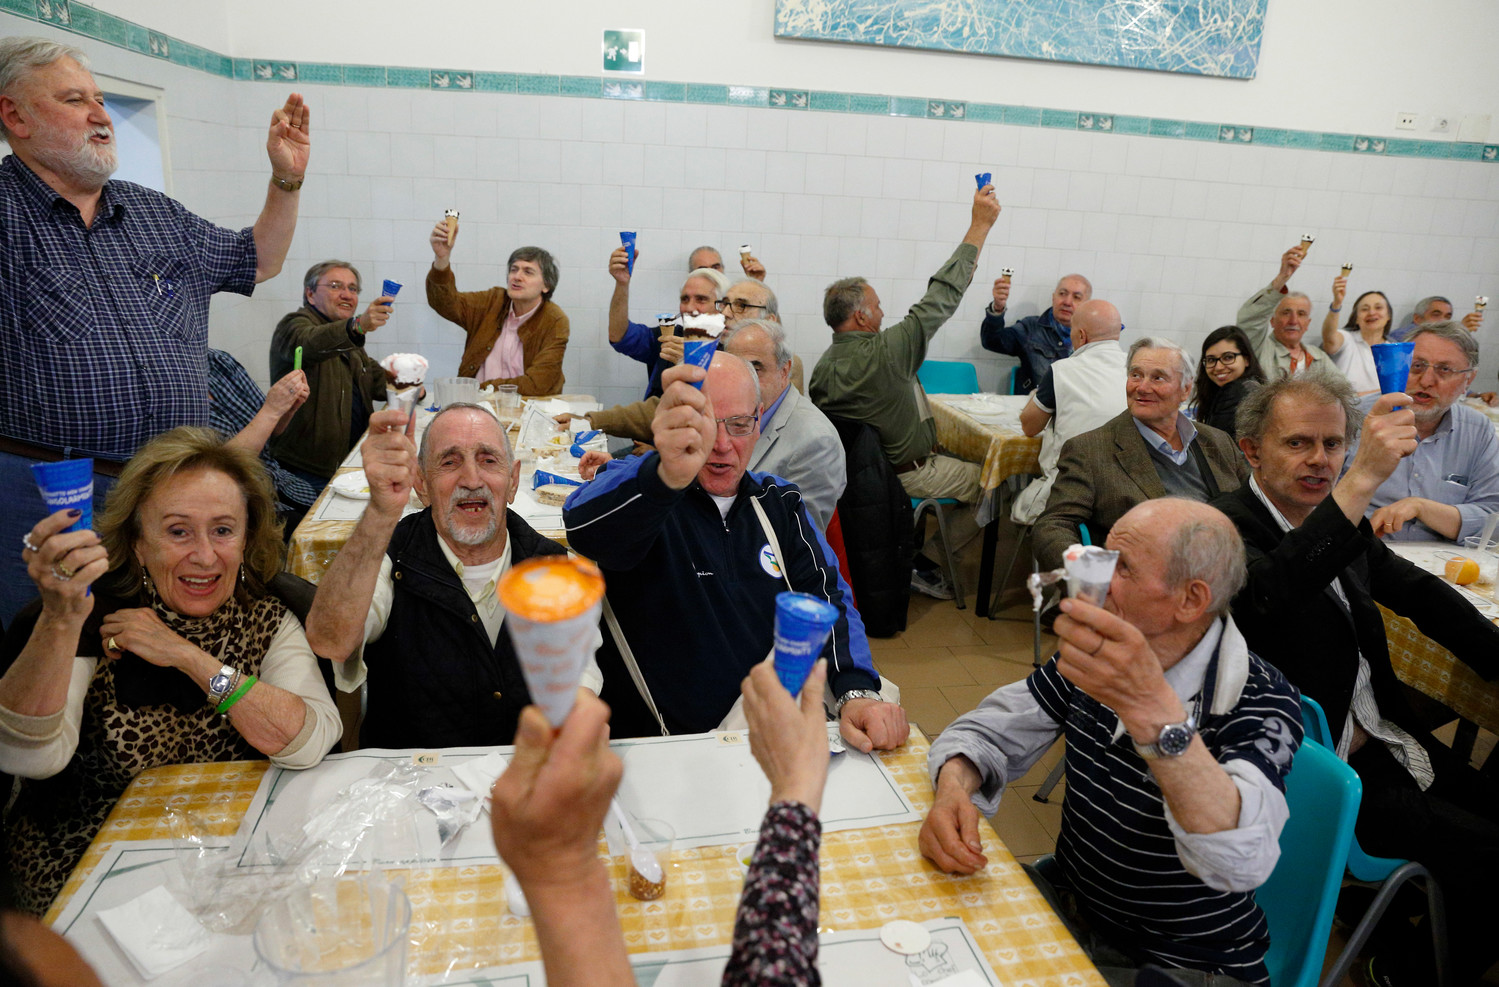 People raise their ice cream cones donated by Pope Francis as they toast the Pope at a Sant’Egidio soup kitchen in Rome April 23. In honor of his name day, the feast of St. George, the Pope donated 3,000 servings of ice cream to soup kitchens and homeless shelters around Rome.